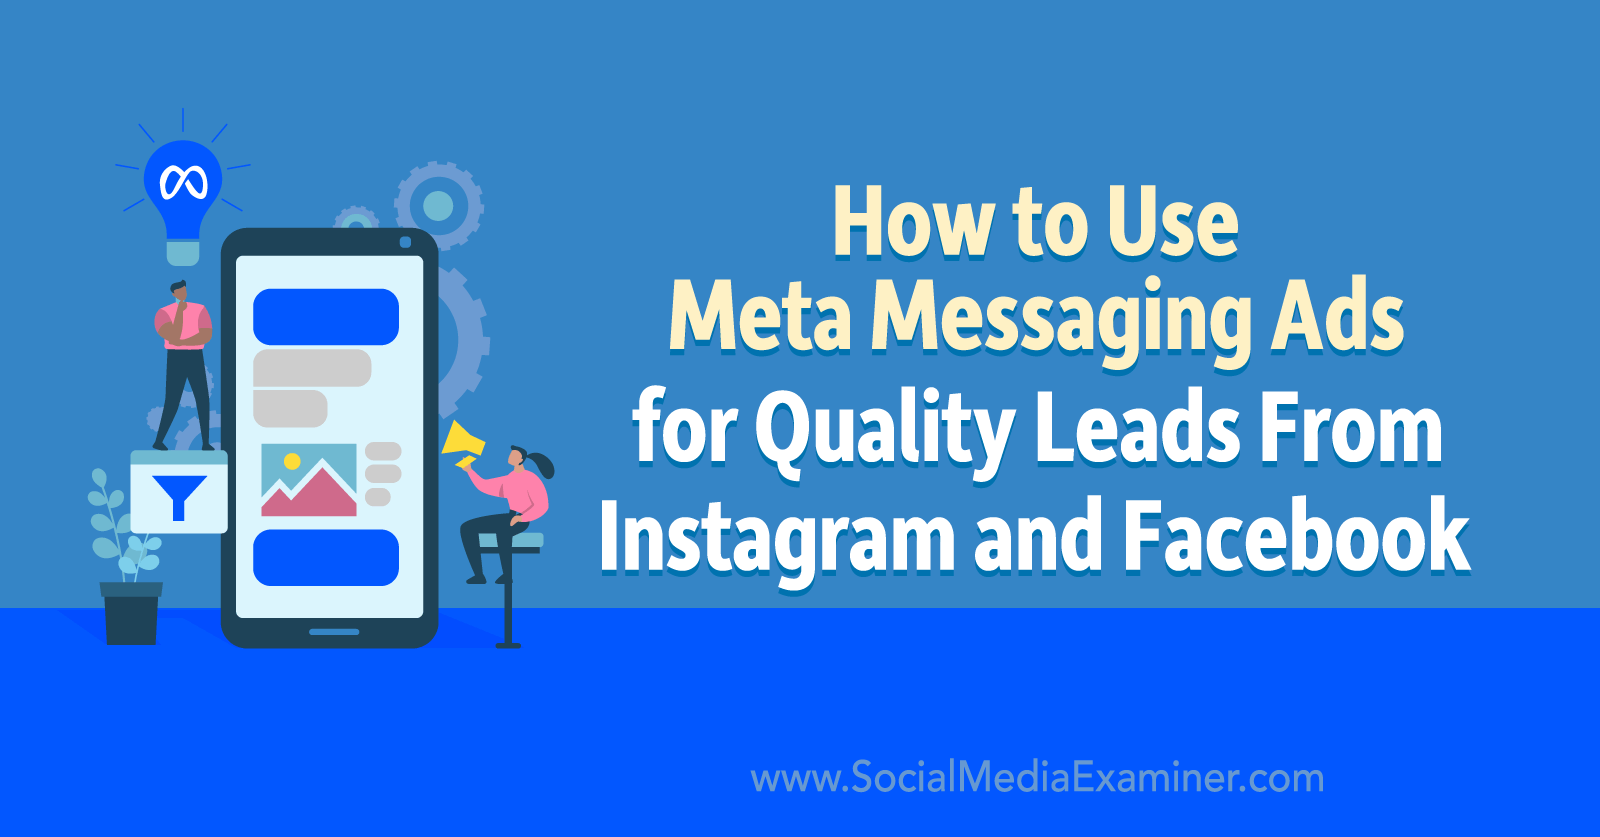 How to Use Meta Messaging Ads for Quality Leads From Instagram and Facebook by Social Media Examiner